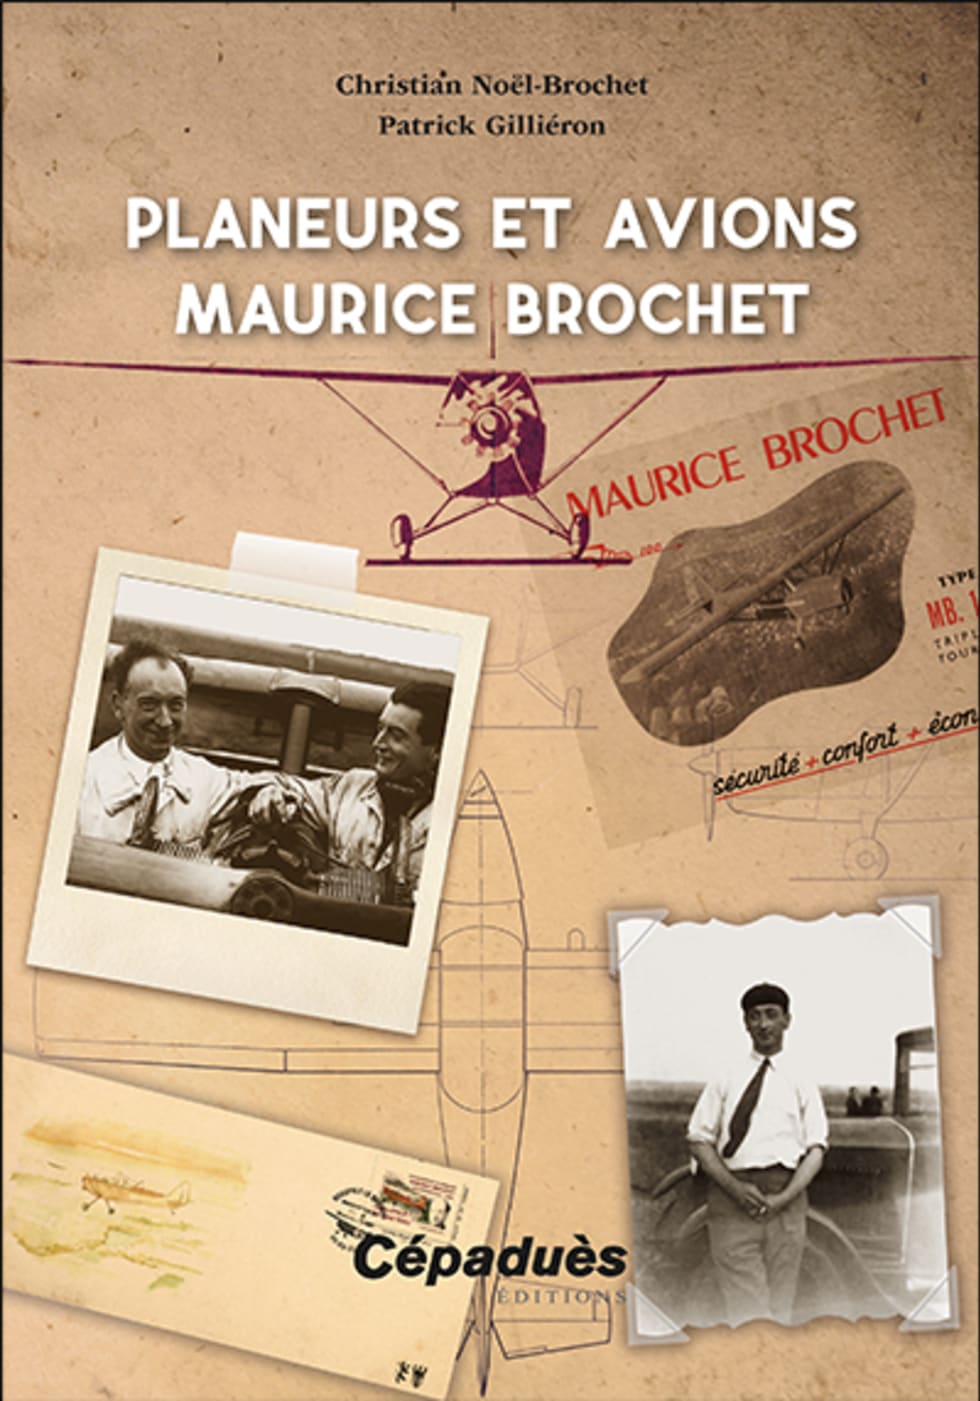 Maurice Brochet gliders and planes